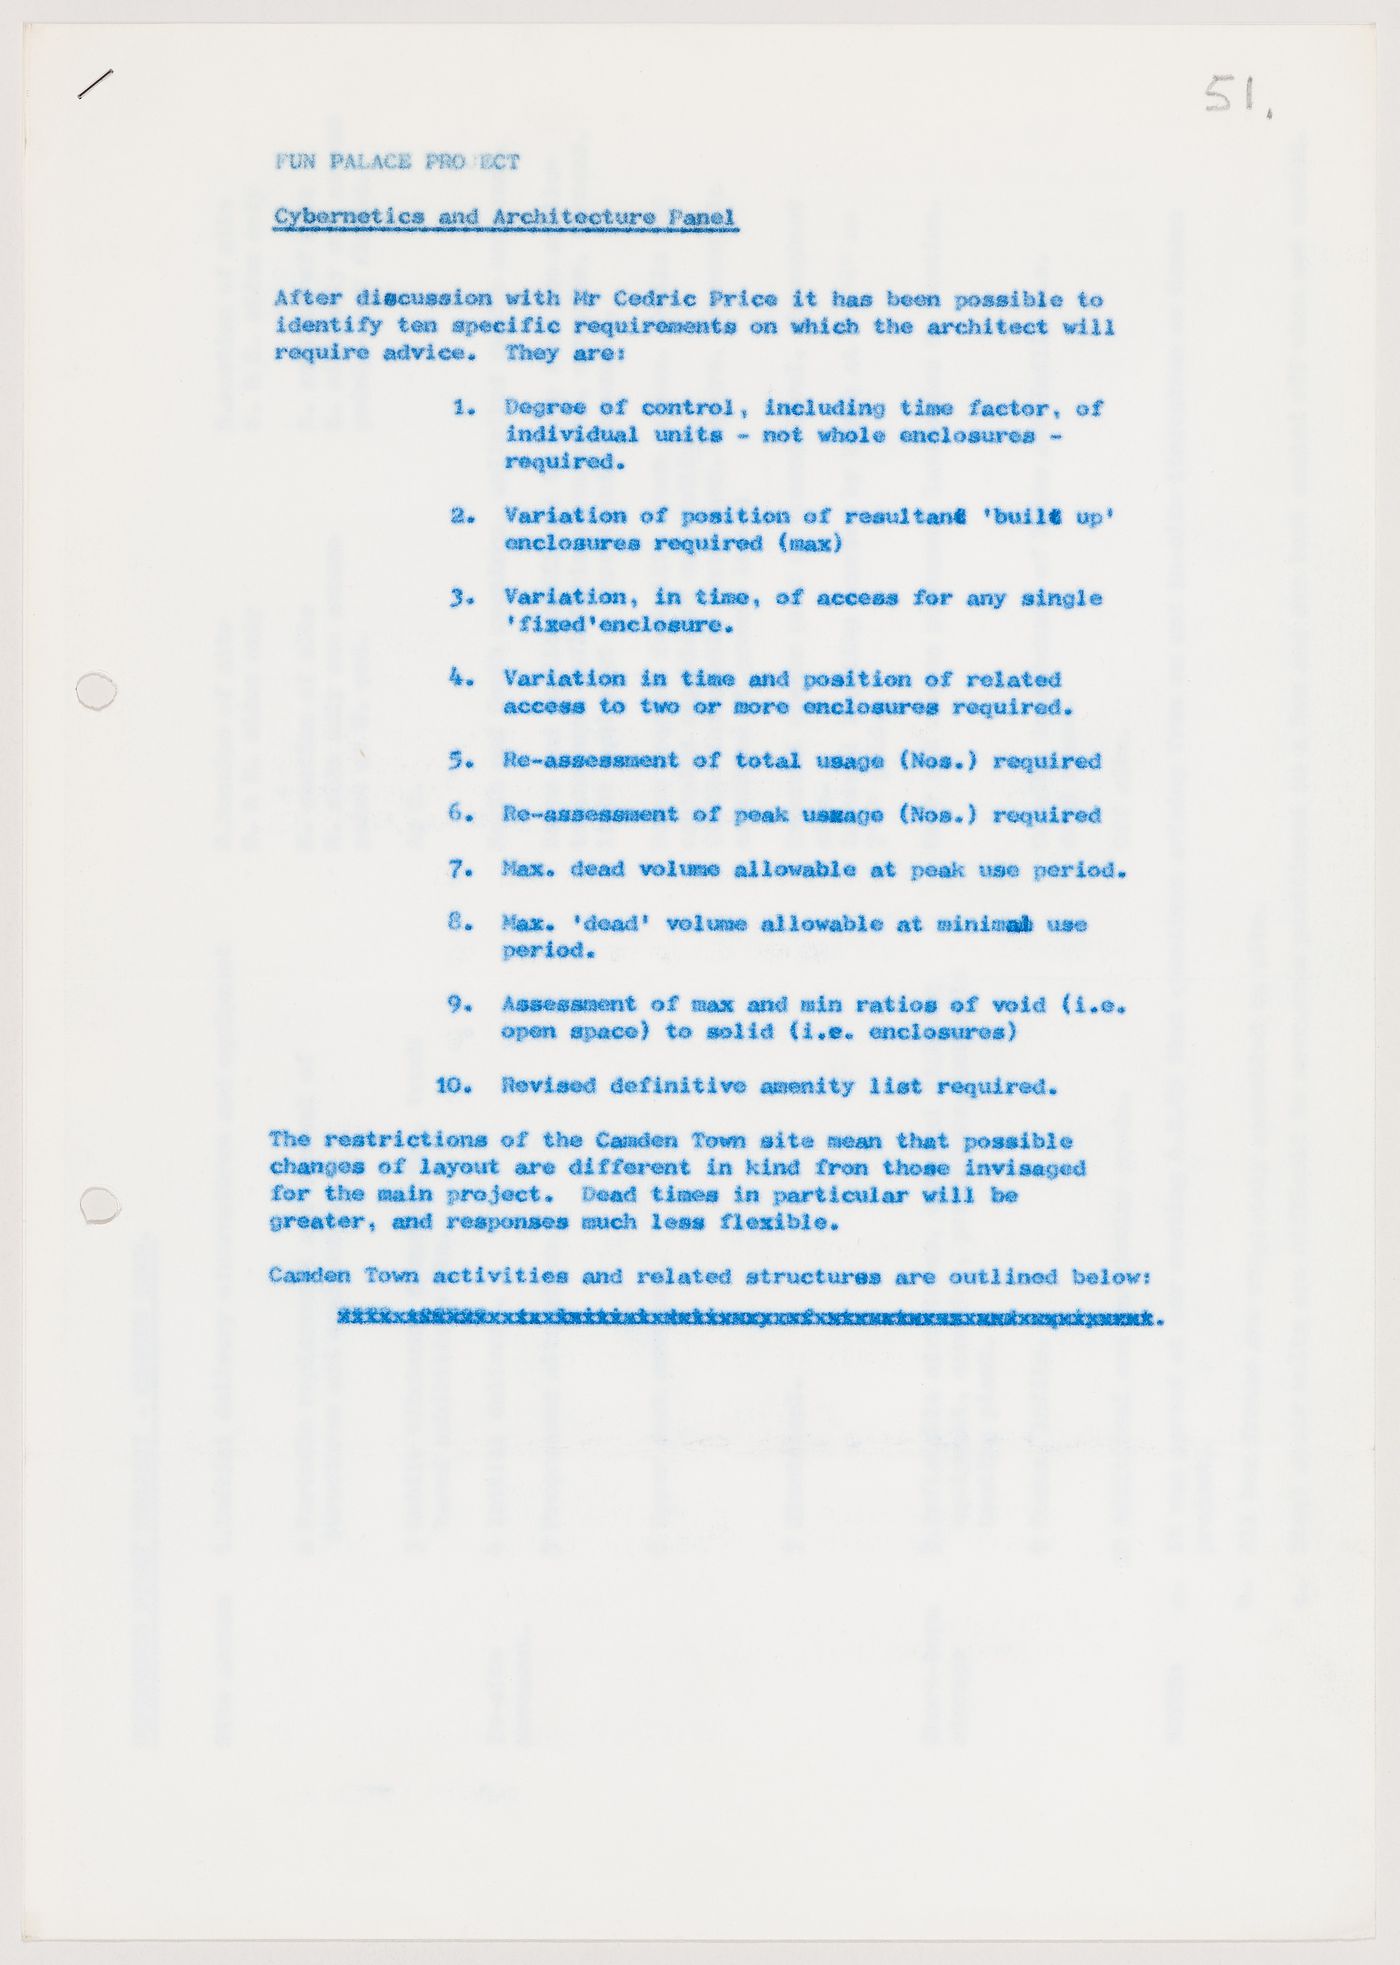 Document produced by the Cybernetics and Architecture Panel for the Fun Palace Project